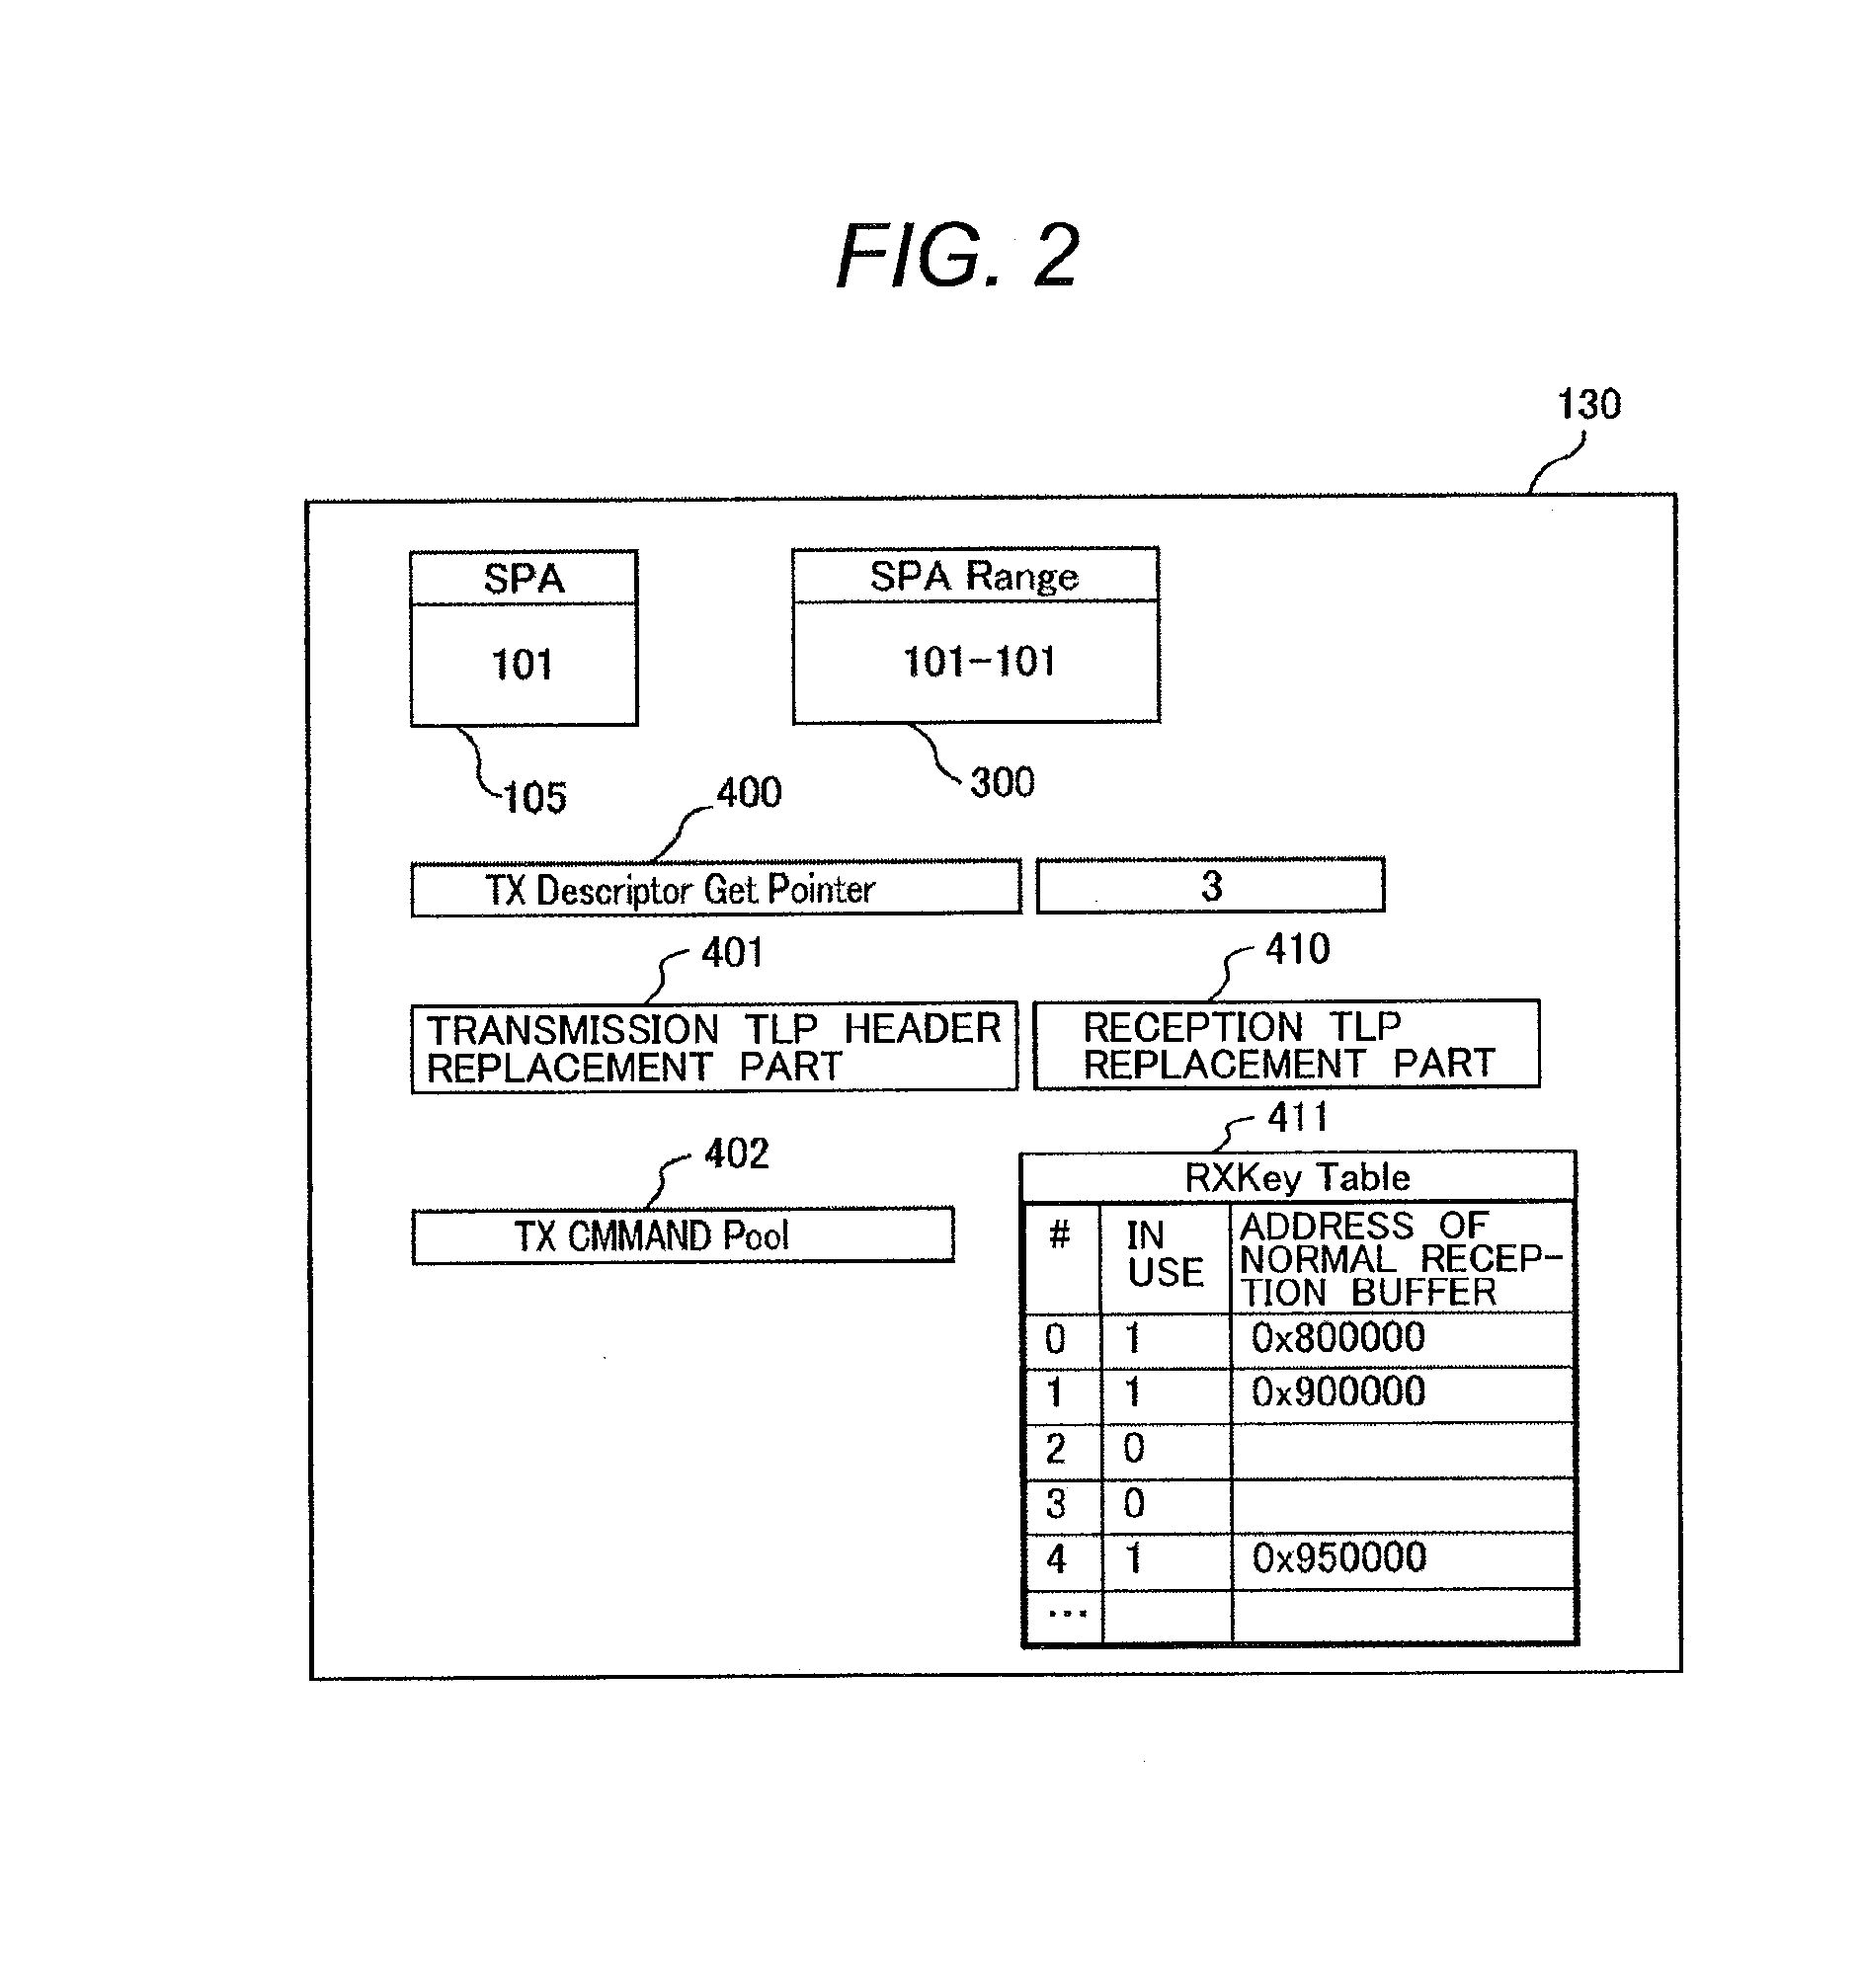 Computer system and method for communicating data between computers